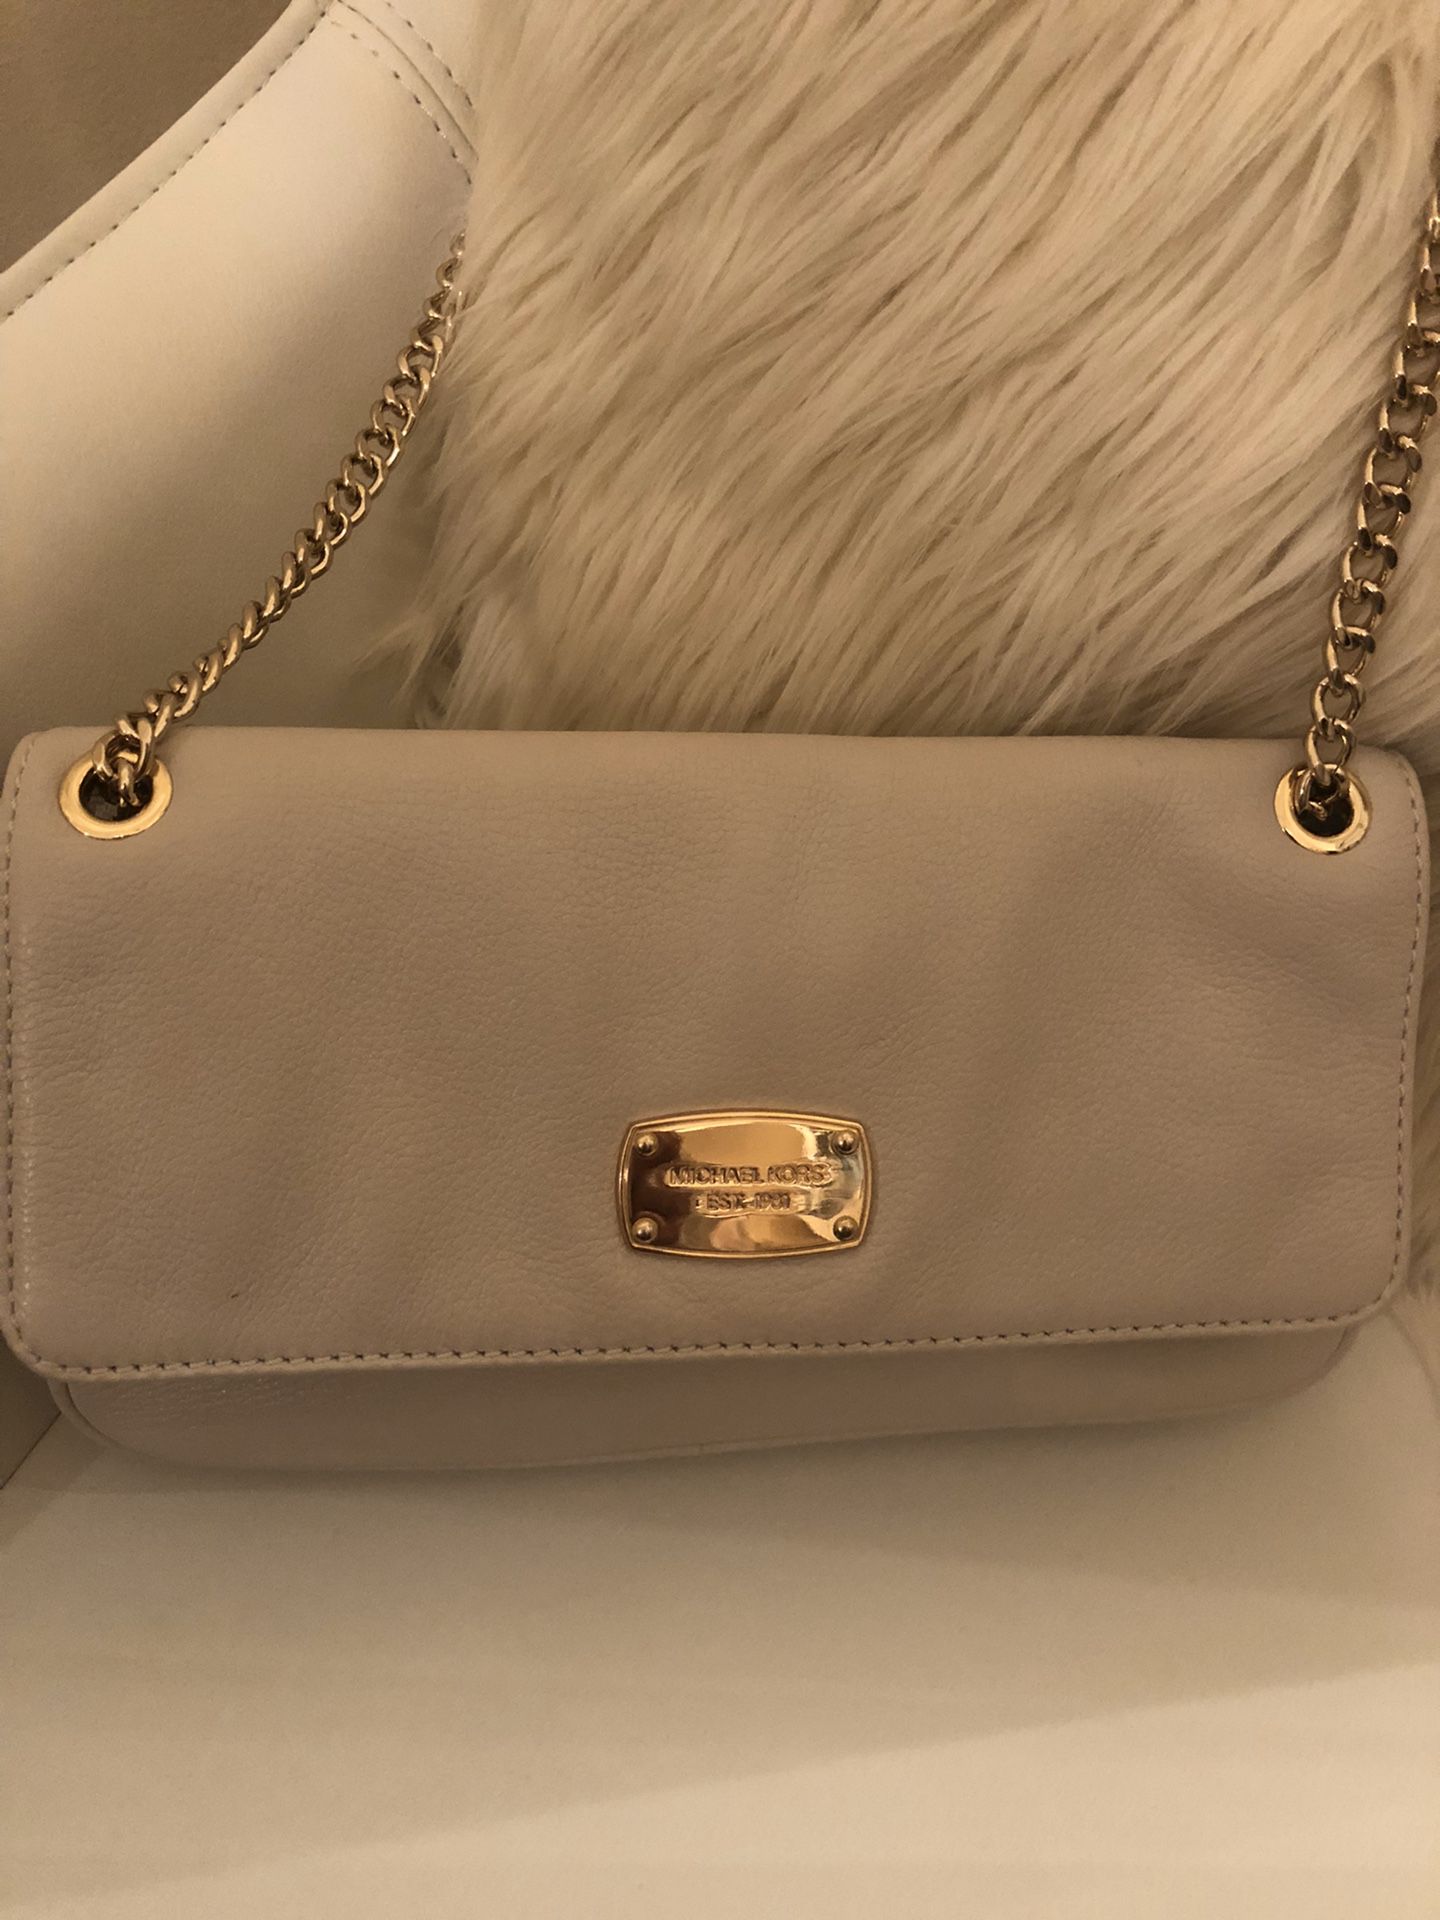 Michael Kors small cream bag with gold chain